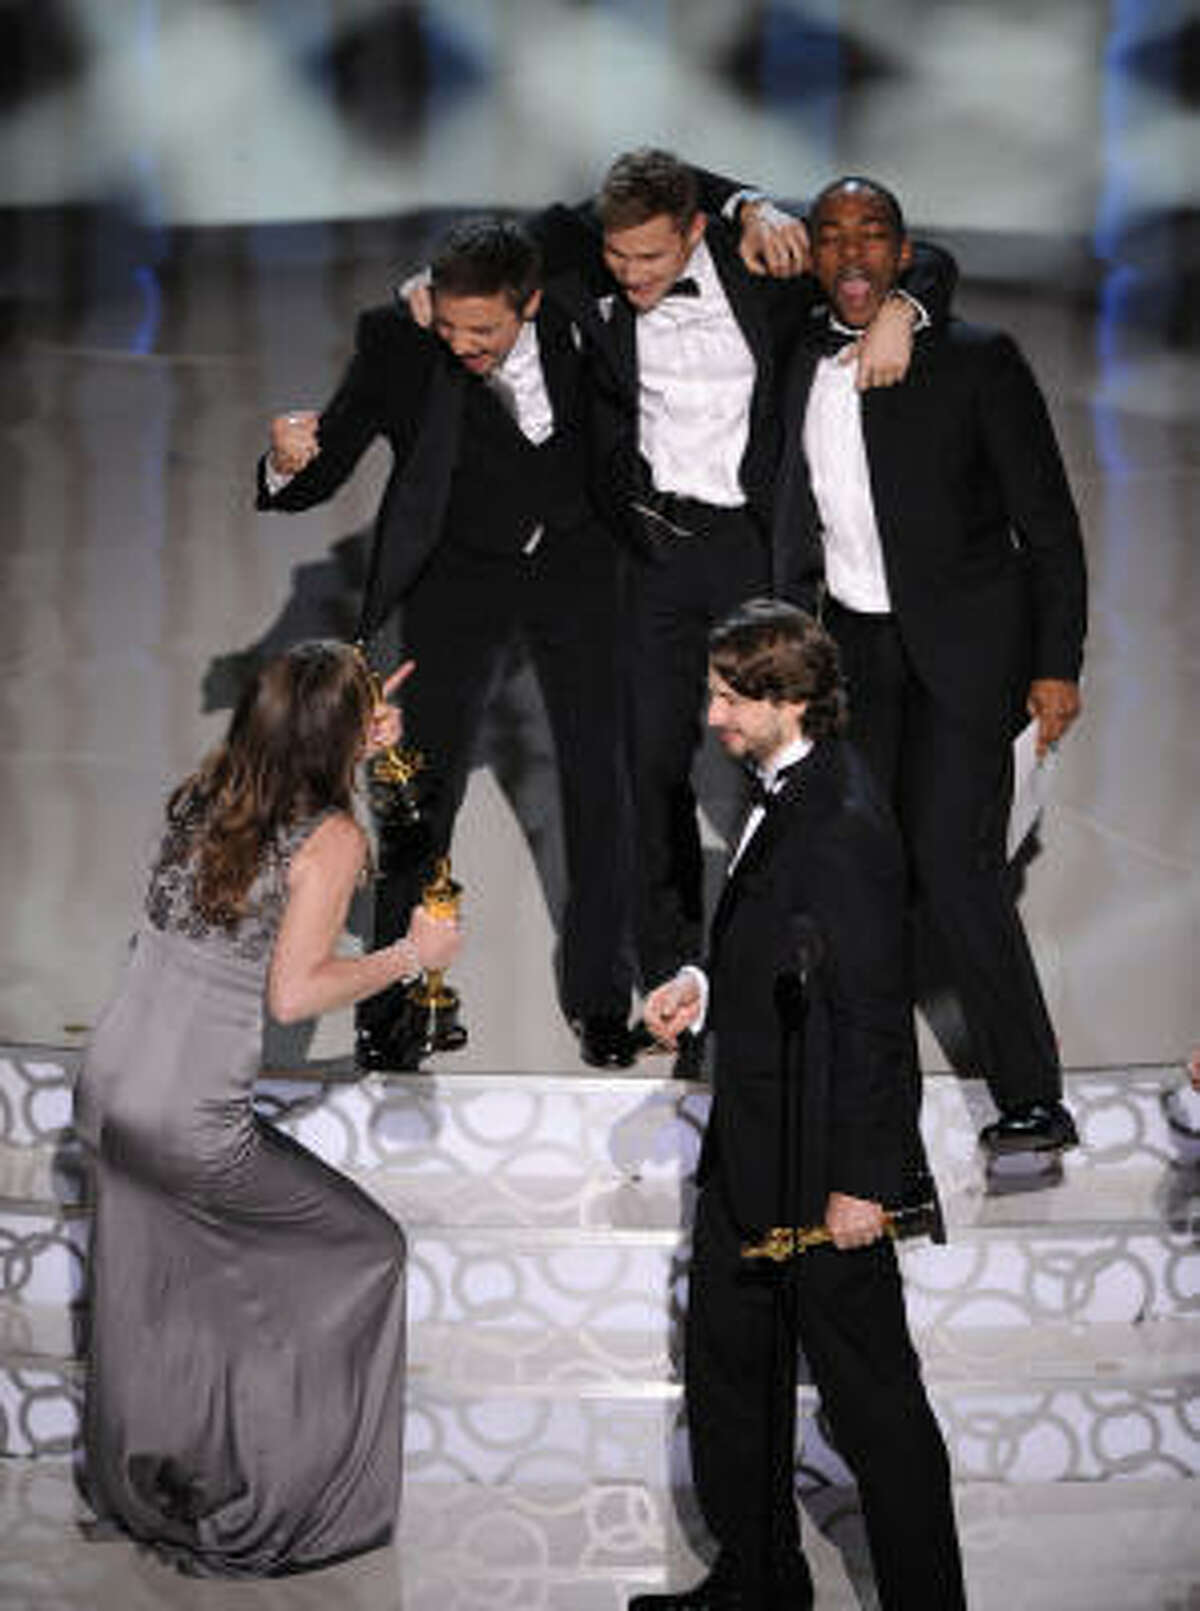 Double fisted: What was the most moving image of the night? Seeing “The Hurt Locker” director Kathryn Bigelow with an Oscar in each hand. The rest of the team looked pretty excited too.